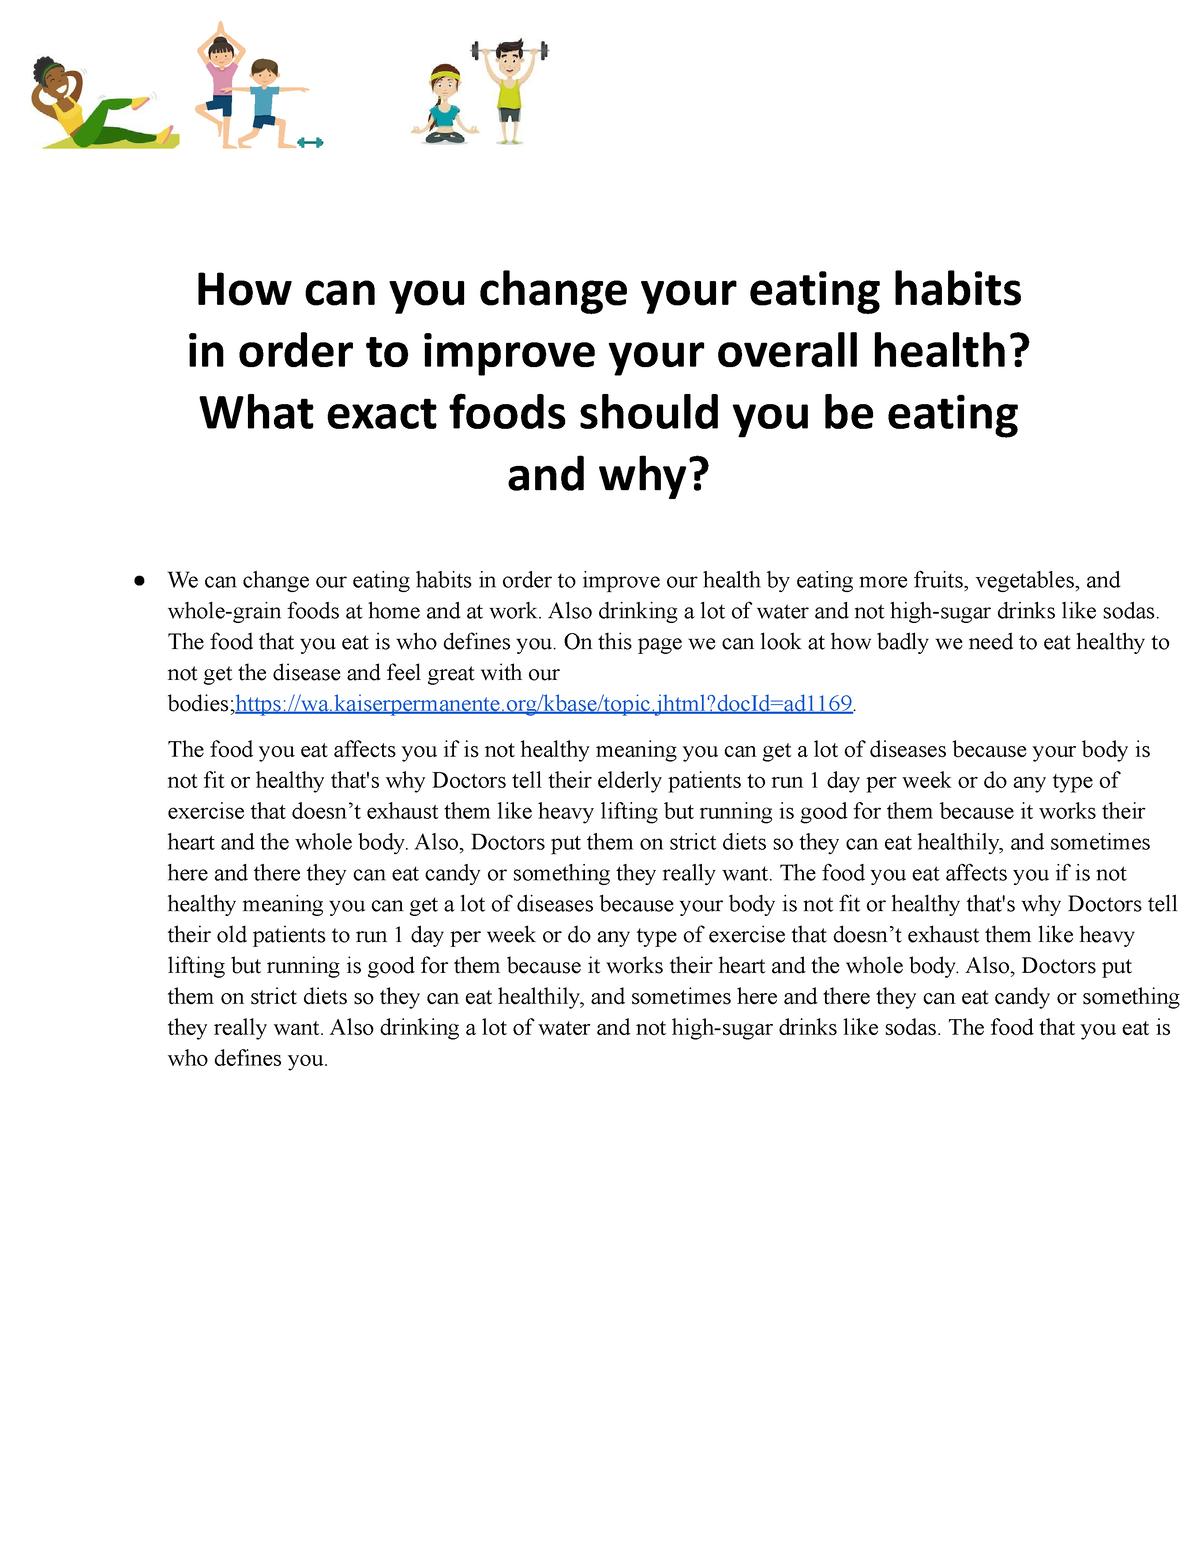 Eating Habits Health - How can you change your eating habits in order ...